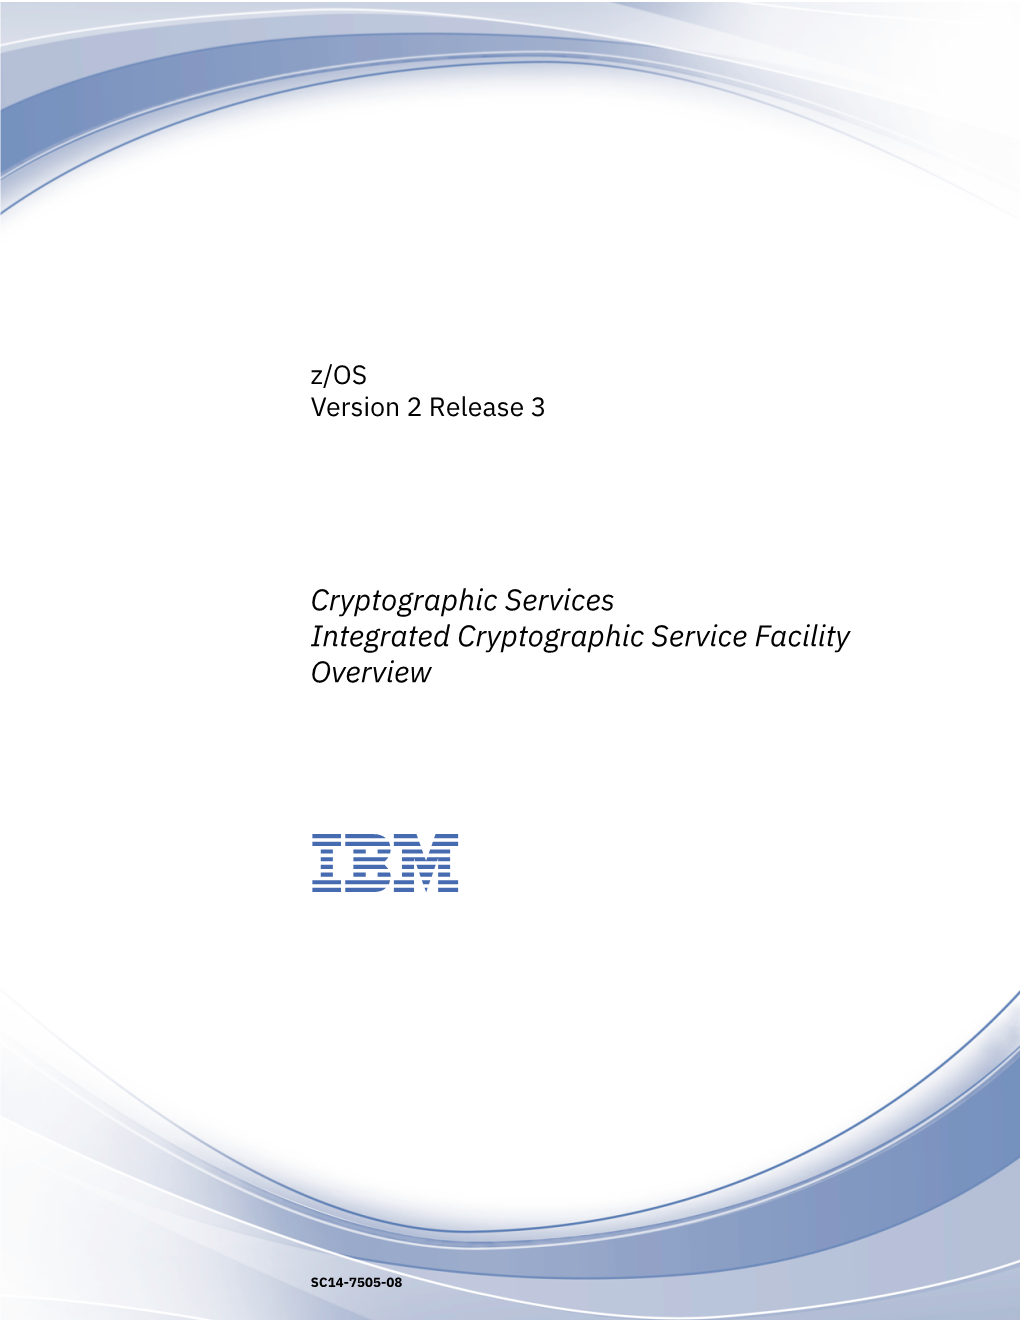 Z/OS ICSF Overview How to Send Your Comments to IBM